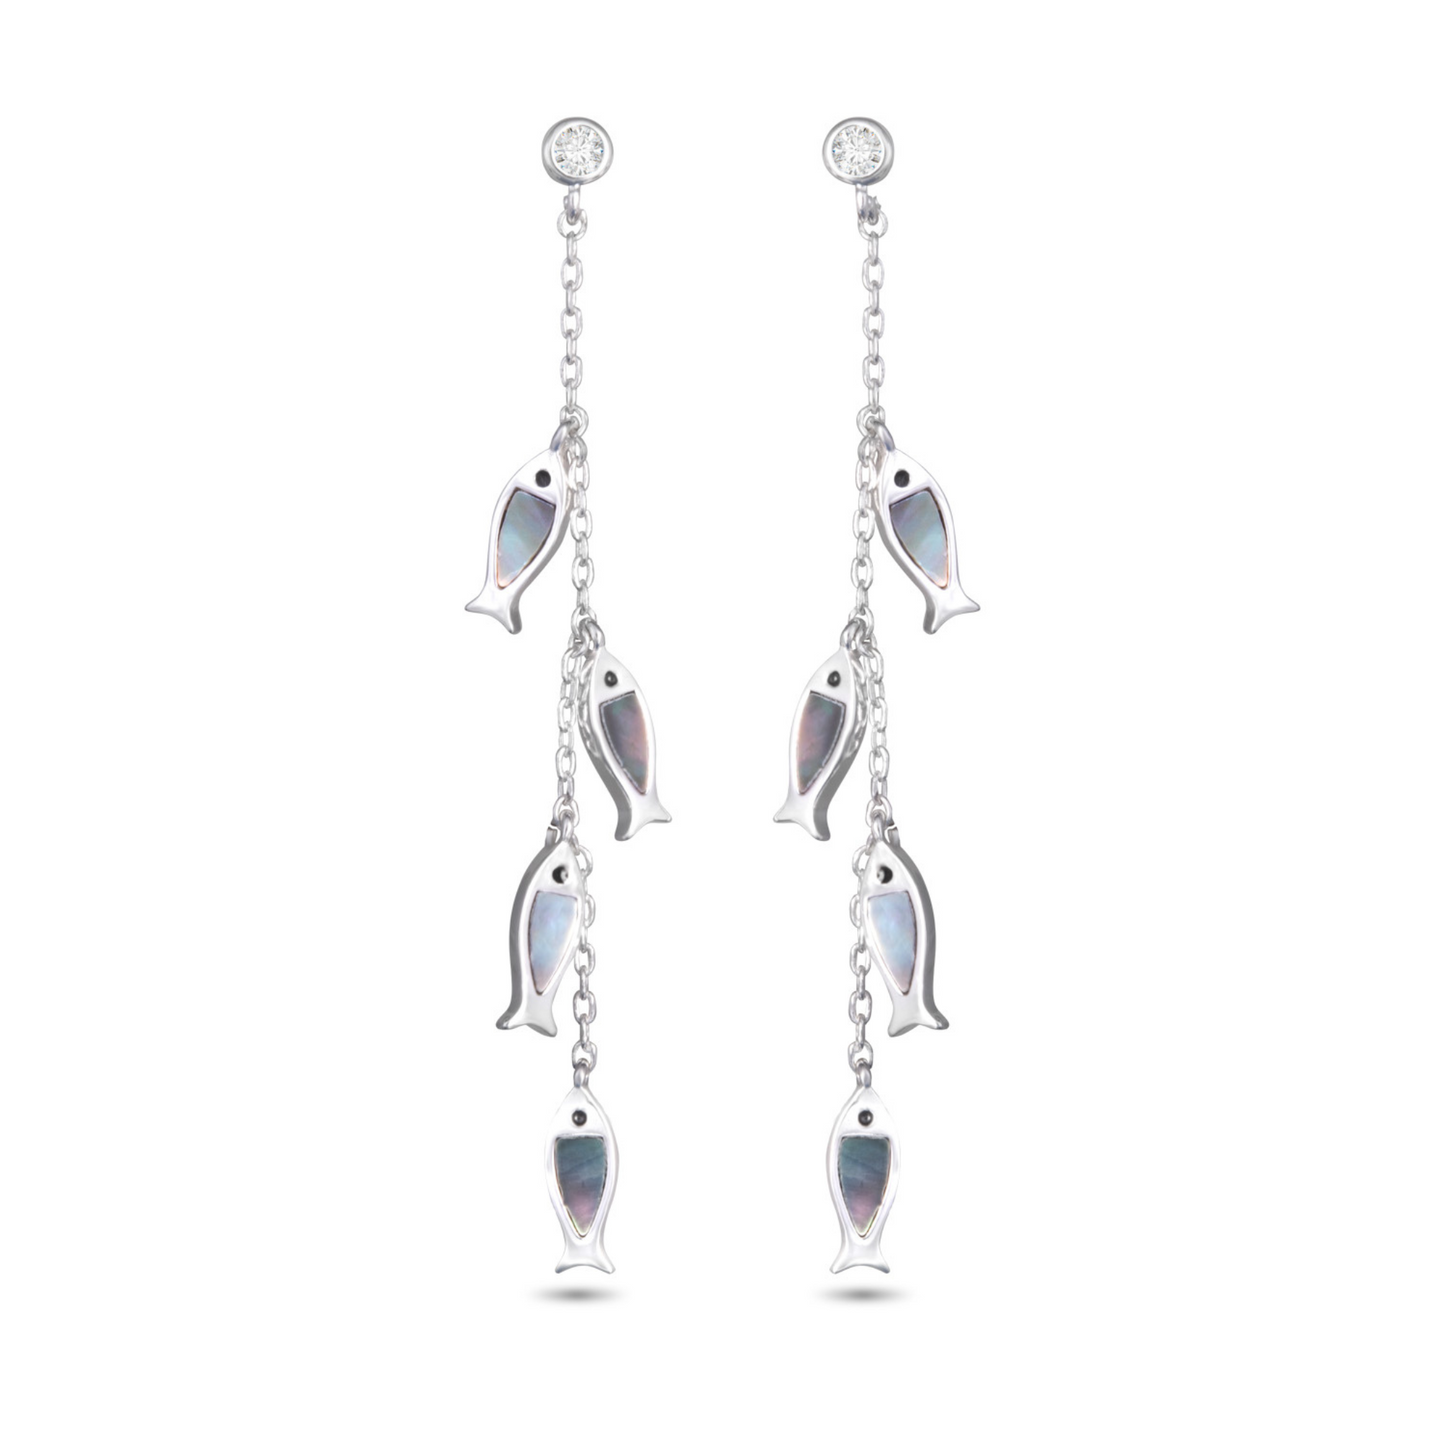 These elegant Four Fish Chain Drop Earrings feature mother of pearl accents and a sleek grey color scheme, making them a sophisticated addition to any outfit. The unique fish design adds a touch of whimsy, while the drop style elongates the neck and adds a flattering effect. Perfect for both formal and casual occasions.